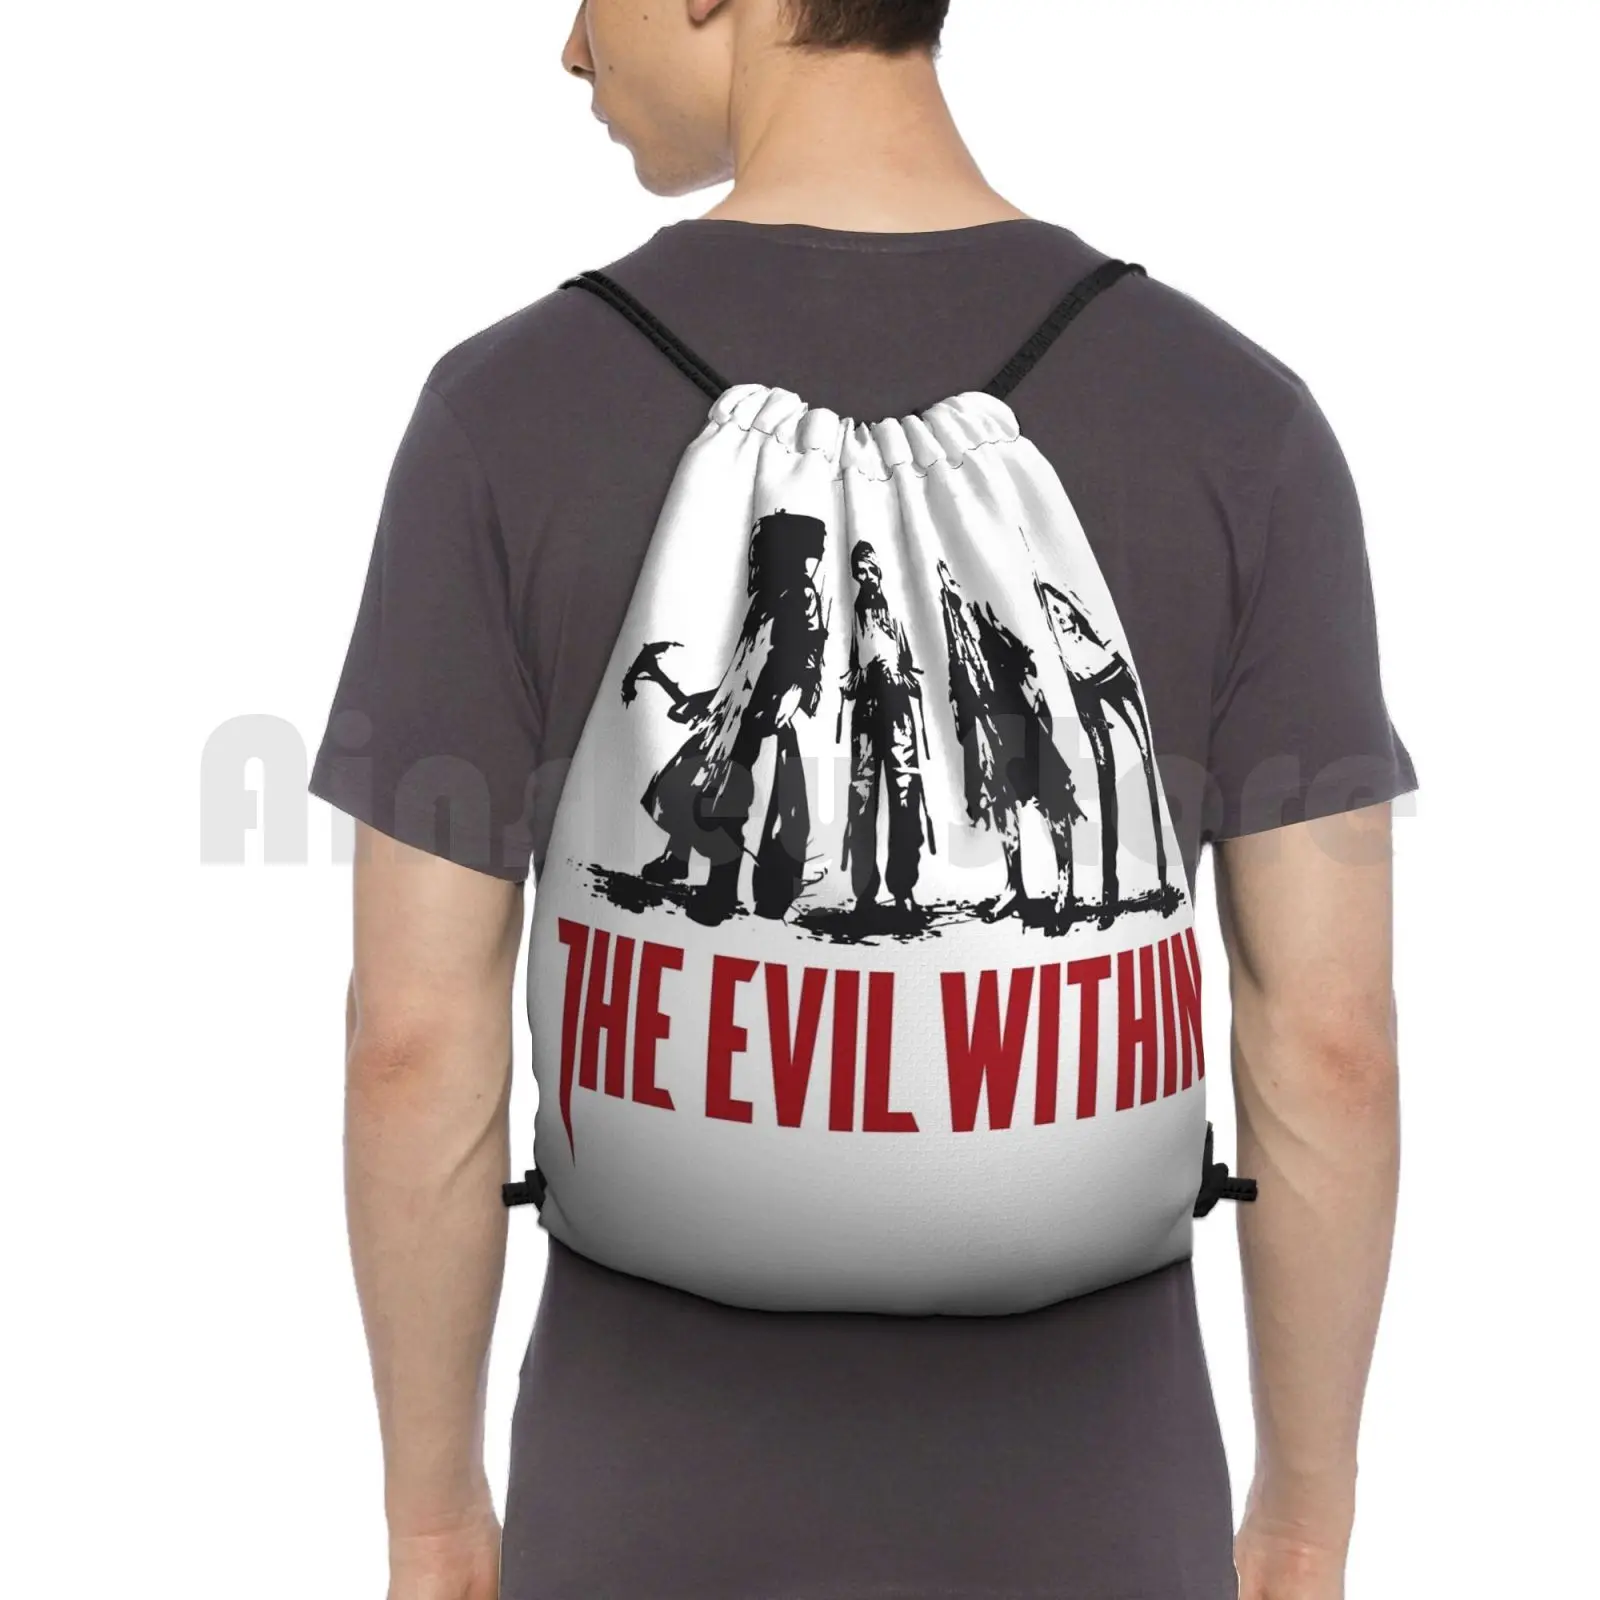 

The Evil Within Backpack Drawstring Bag Riding Climbing Gym Bag Castellanos Joseph Oda The Evil Within Survival Horror